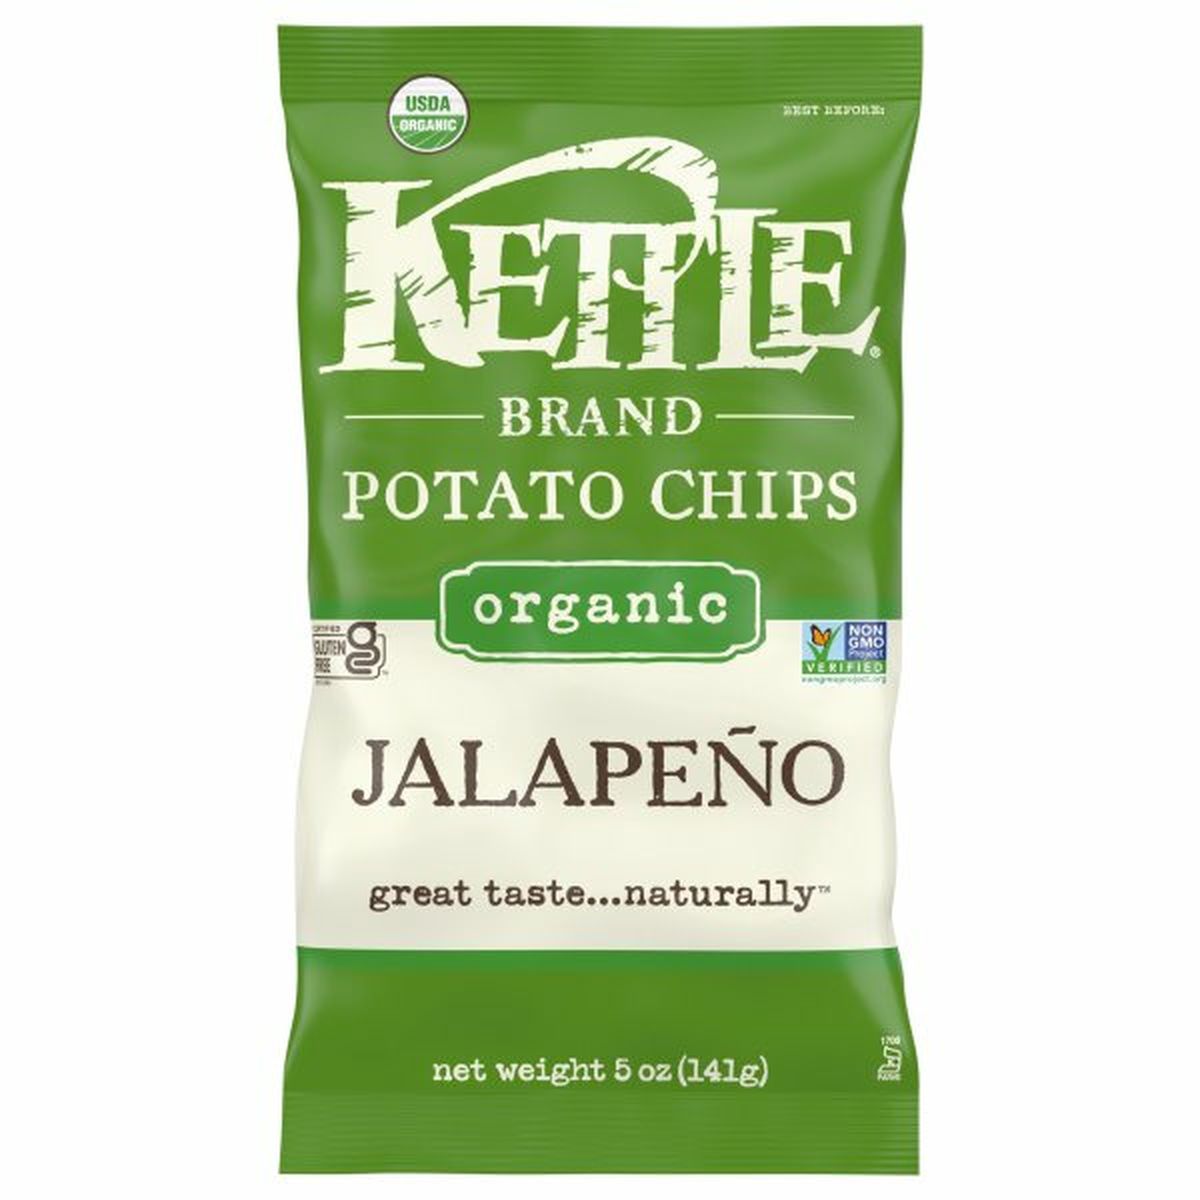 Calories in Kettle Brands Potato Chips, Organic, Jalapeno